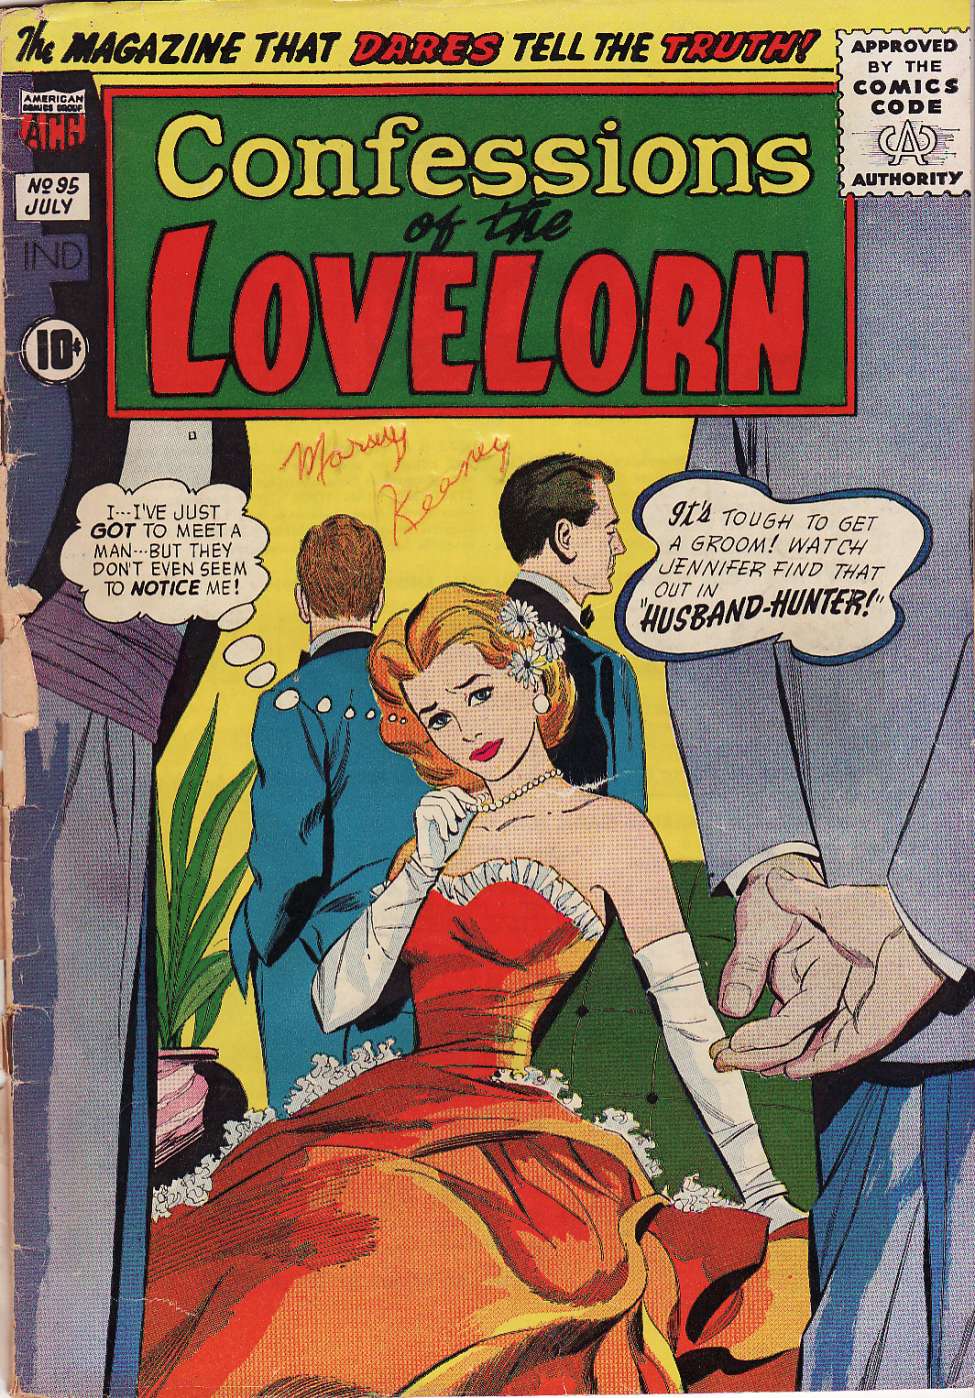 Comic Book Cover For Confessions of the Lovelorn 95